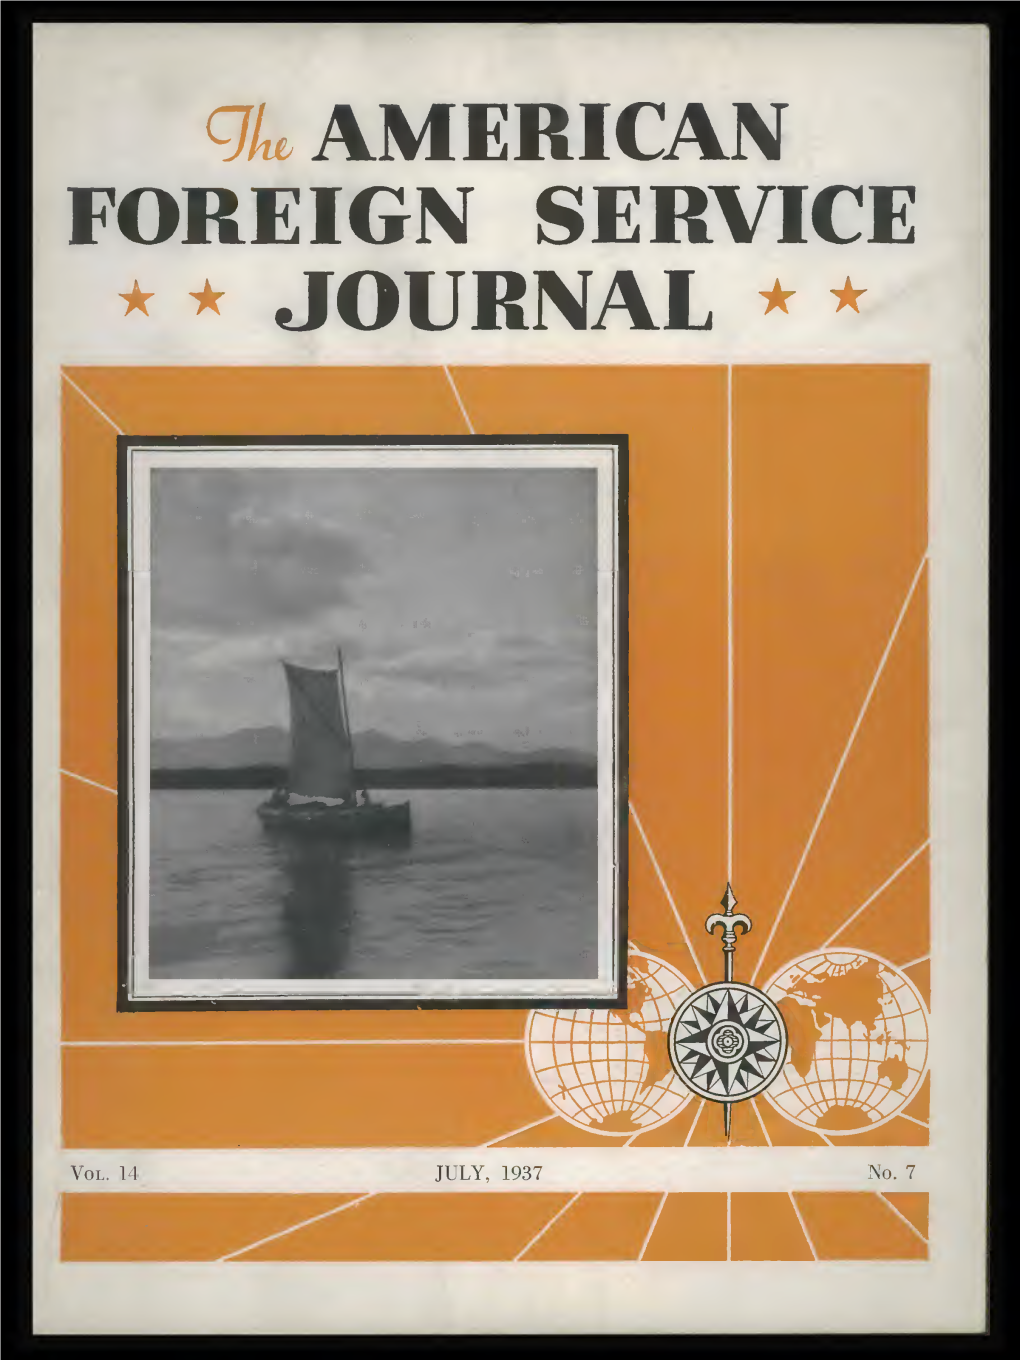 The Foreign Service Journal, July 1937